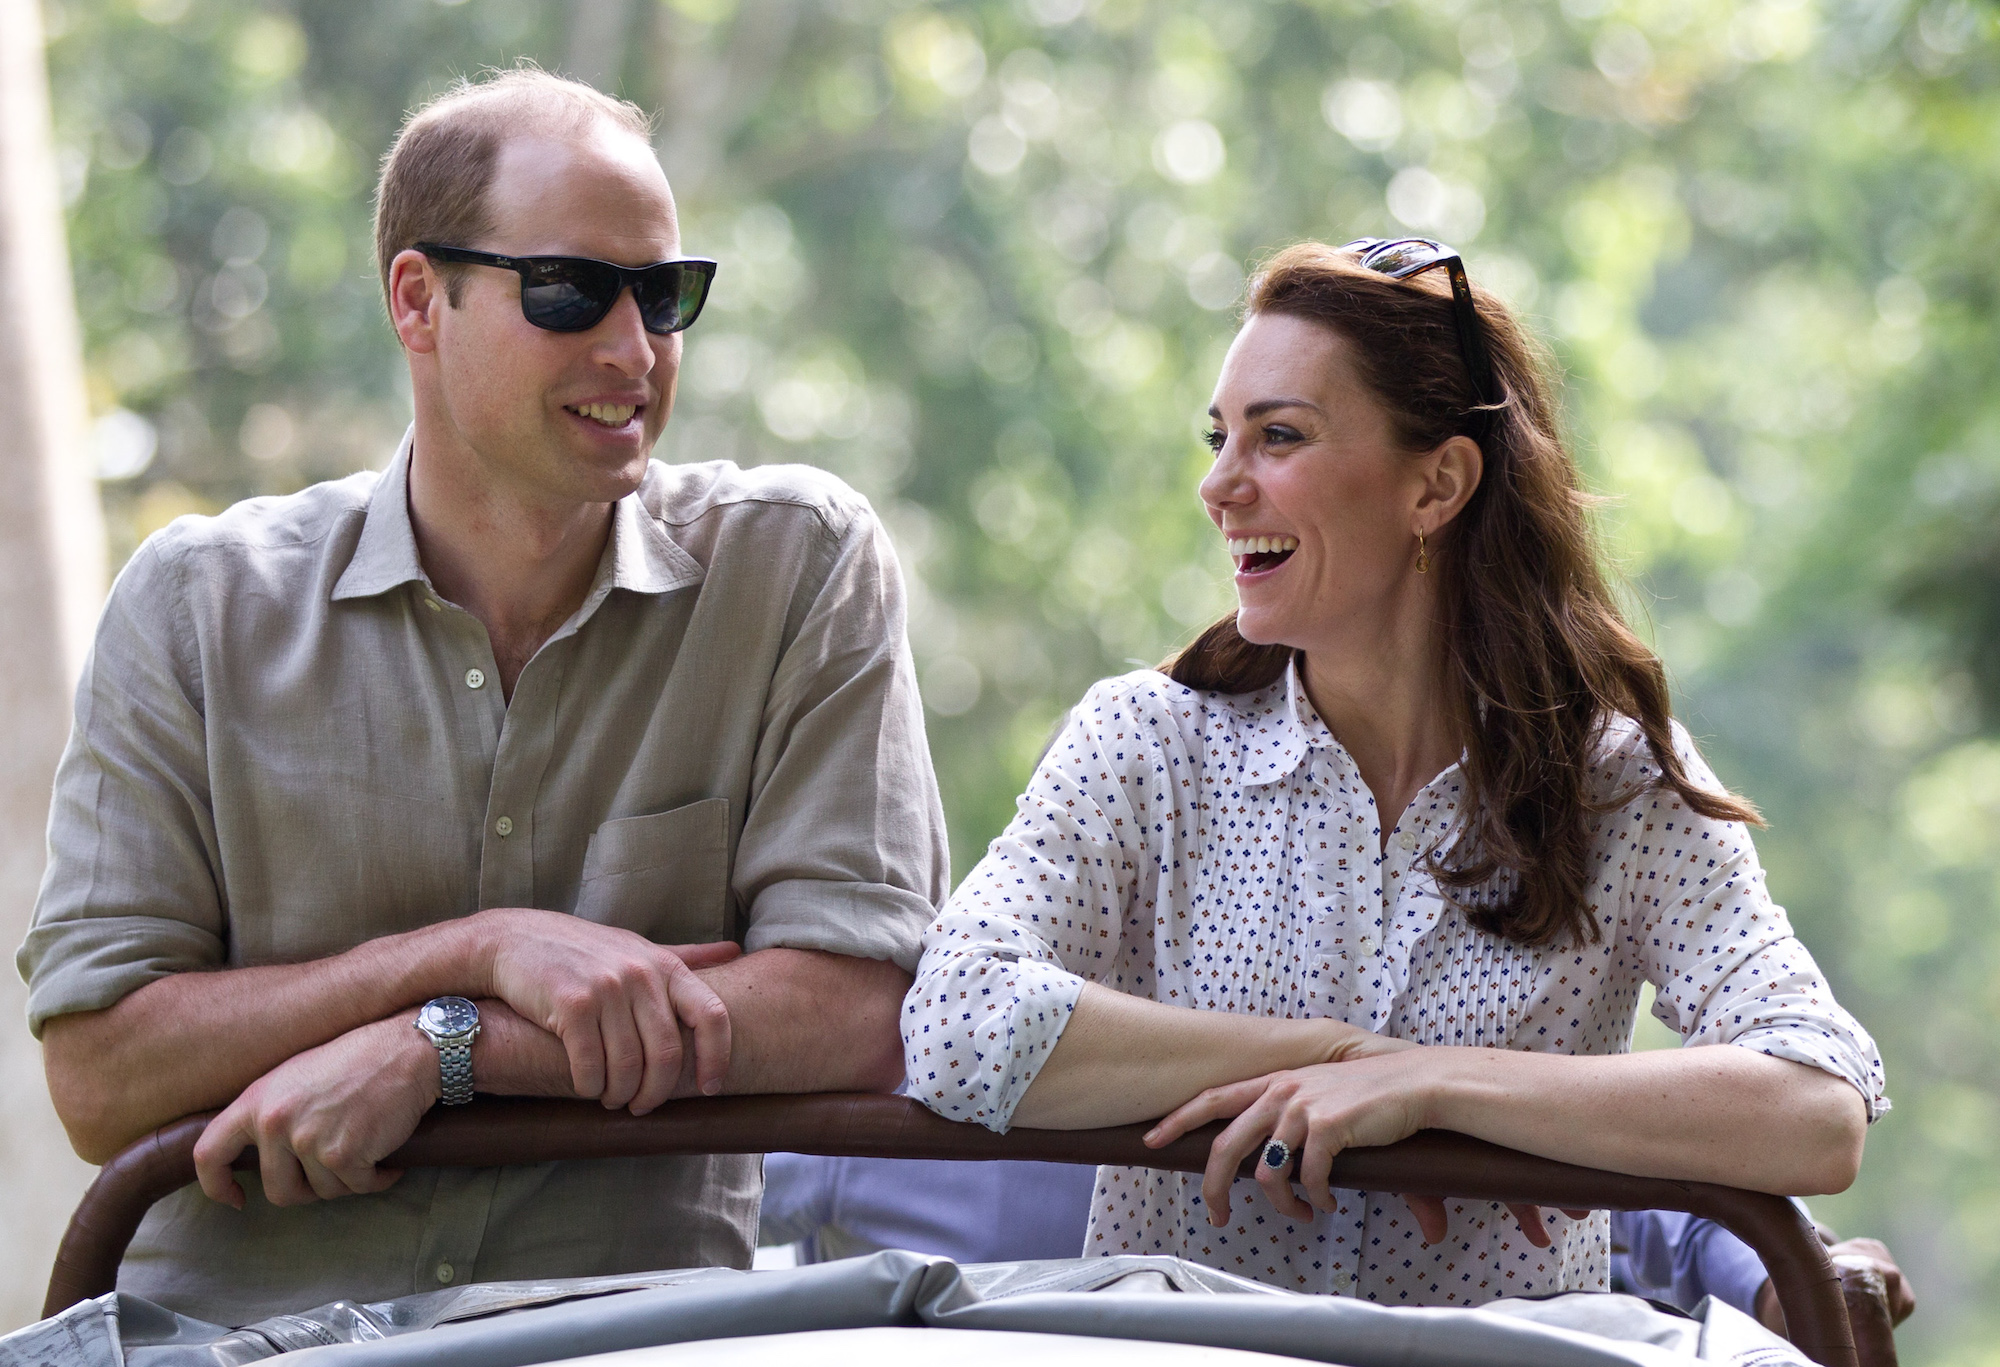 Prince William and Kate Middleton laughing in front of a blurred background in this royals picture